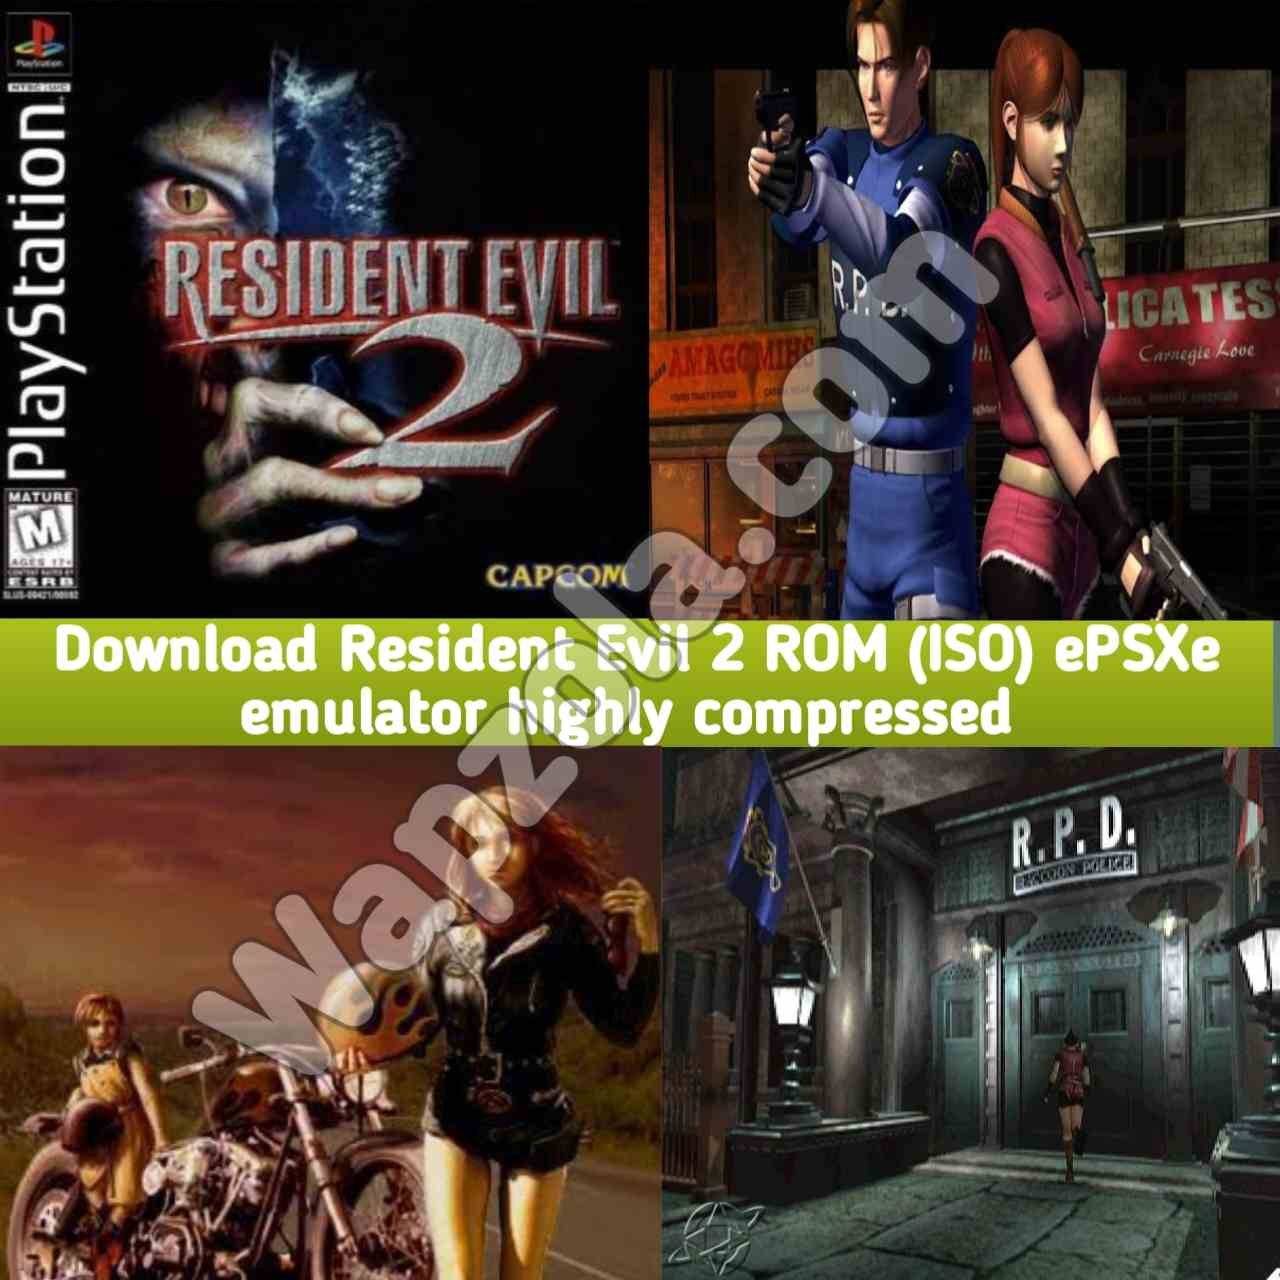 You are currently viewing [Download] Resident Evil 2 ROM (ISO) ePSXe and Fpse emulator (50MB size) highly compressed – Sony Playstation / PSX / PS1 APK BIN/CUE play on Android and pc